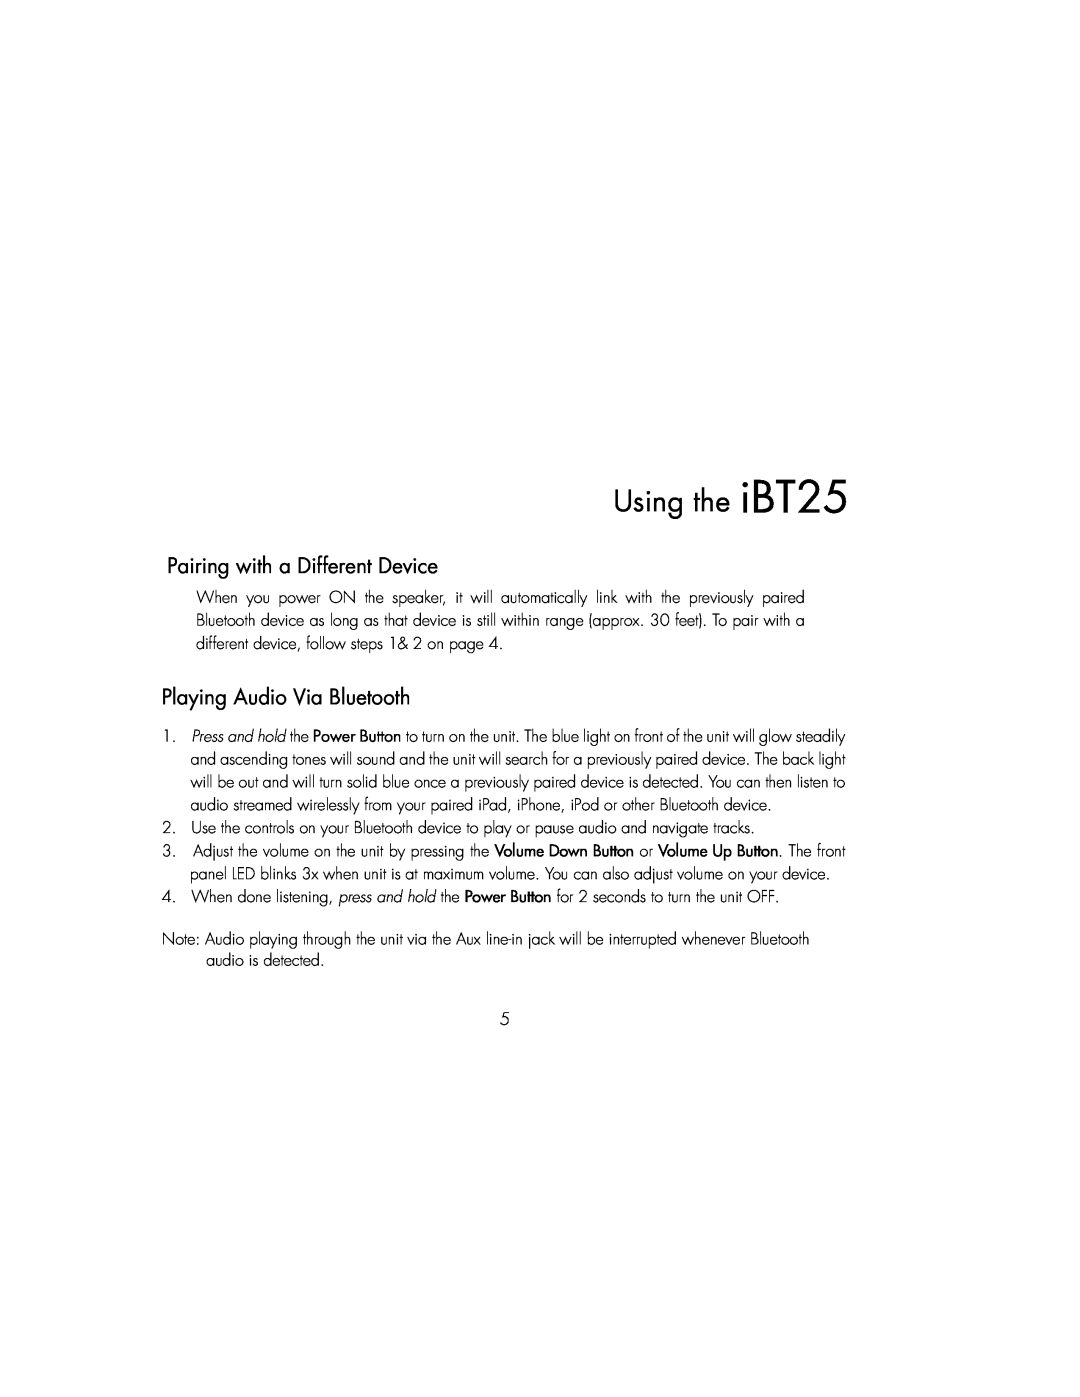 iHome IBT25BC instruction manual Pairing with a Different Device, Playing Audio Via Bluetooth, Using the iBT25 